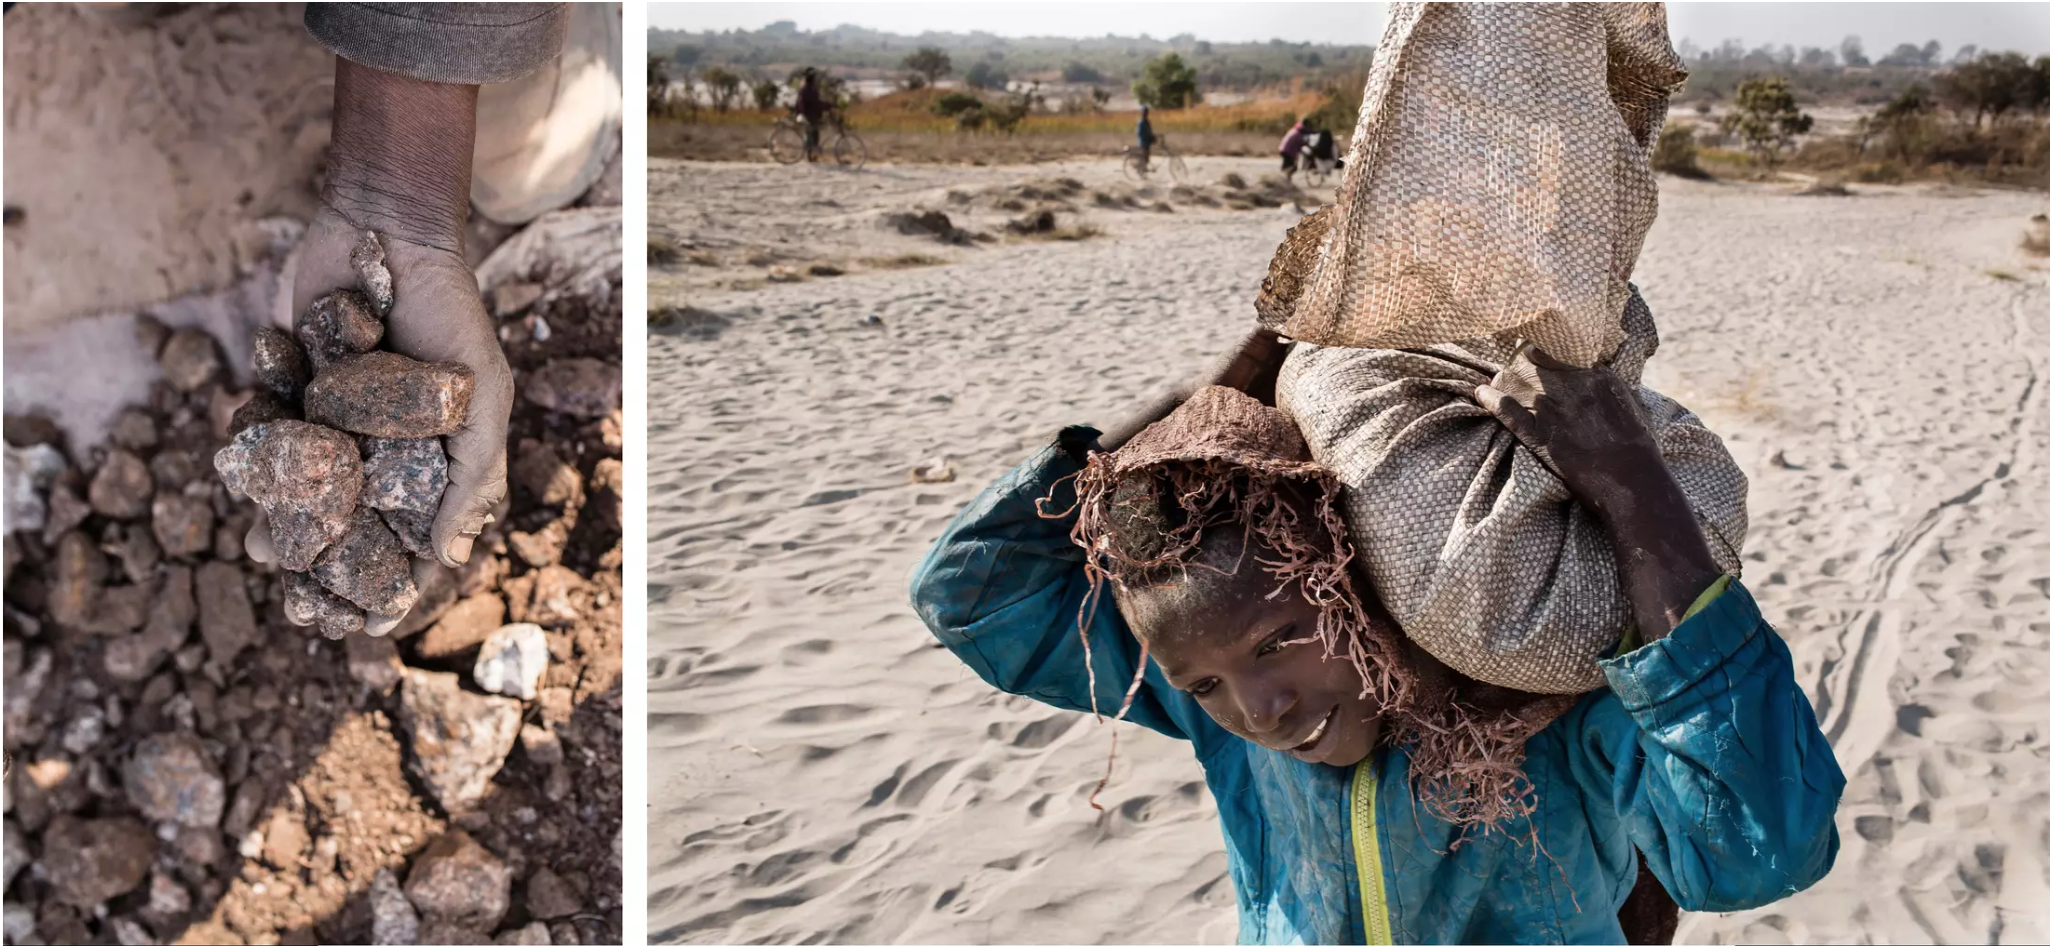 Left: A miner holds chunks of cobalt he has dug out at the Kasulo mine near Kolwezi in the DRC. Right: An 11-year-old mine worker named Daniel carries a bag of cobalt from a dig site to a depot to be sold. Image by Sebastian Meyer. Democratic Republic of Congo, 2018.